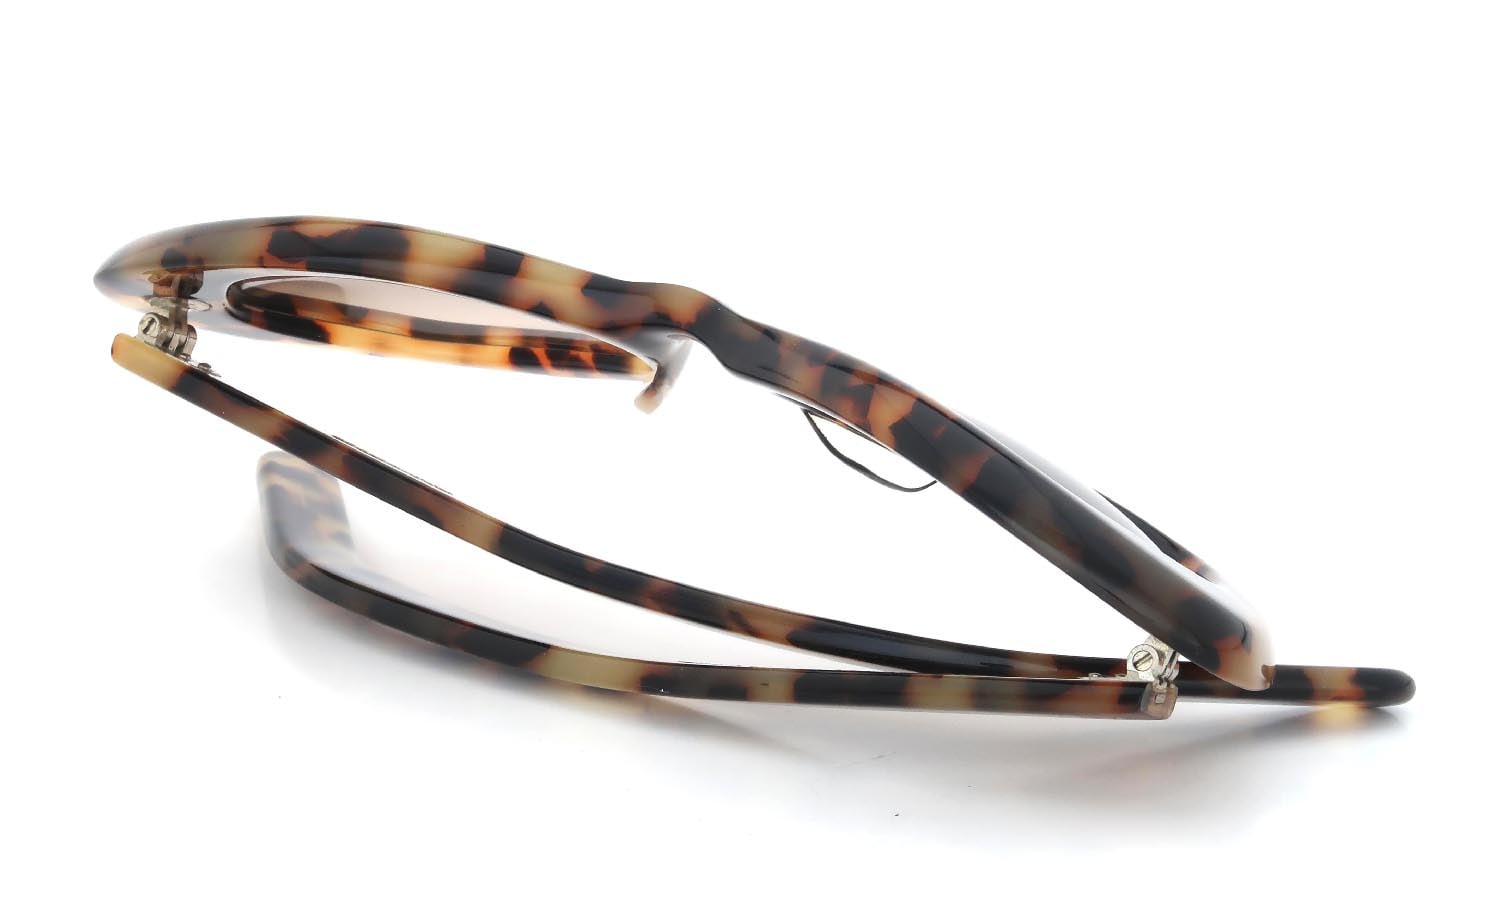 Oliver Goldsmith COUNTESS Leopard